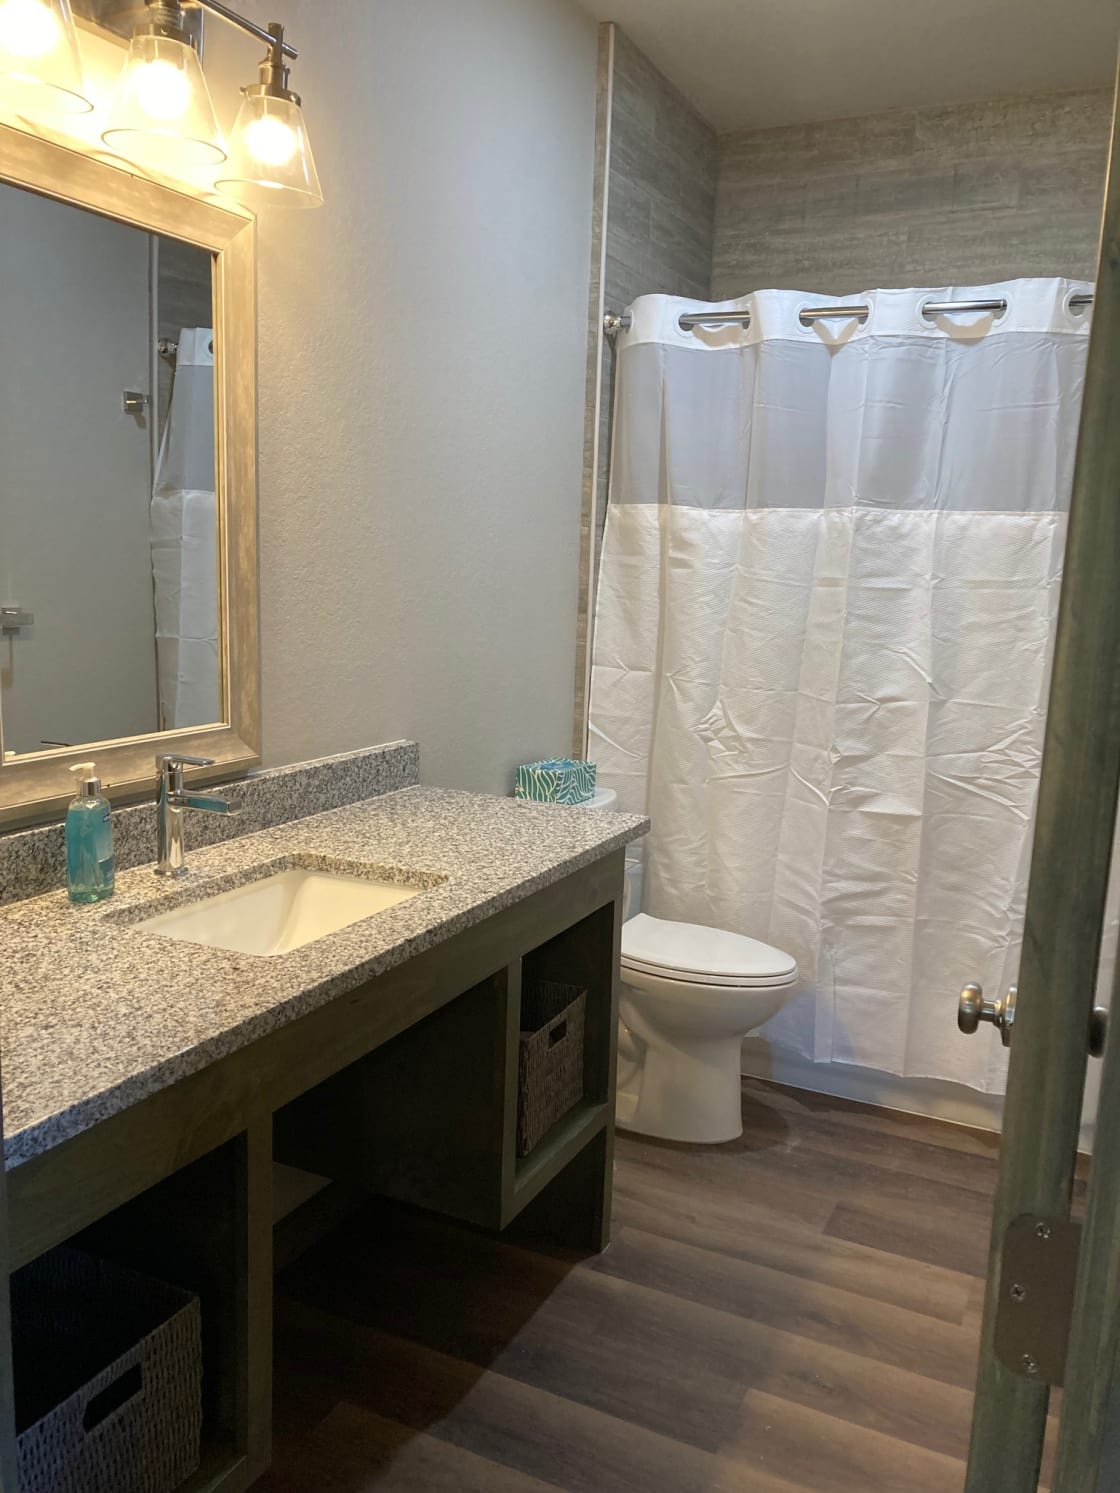 Bathroom located off living area. Shower/tub combo.